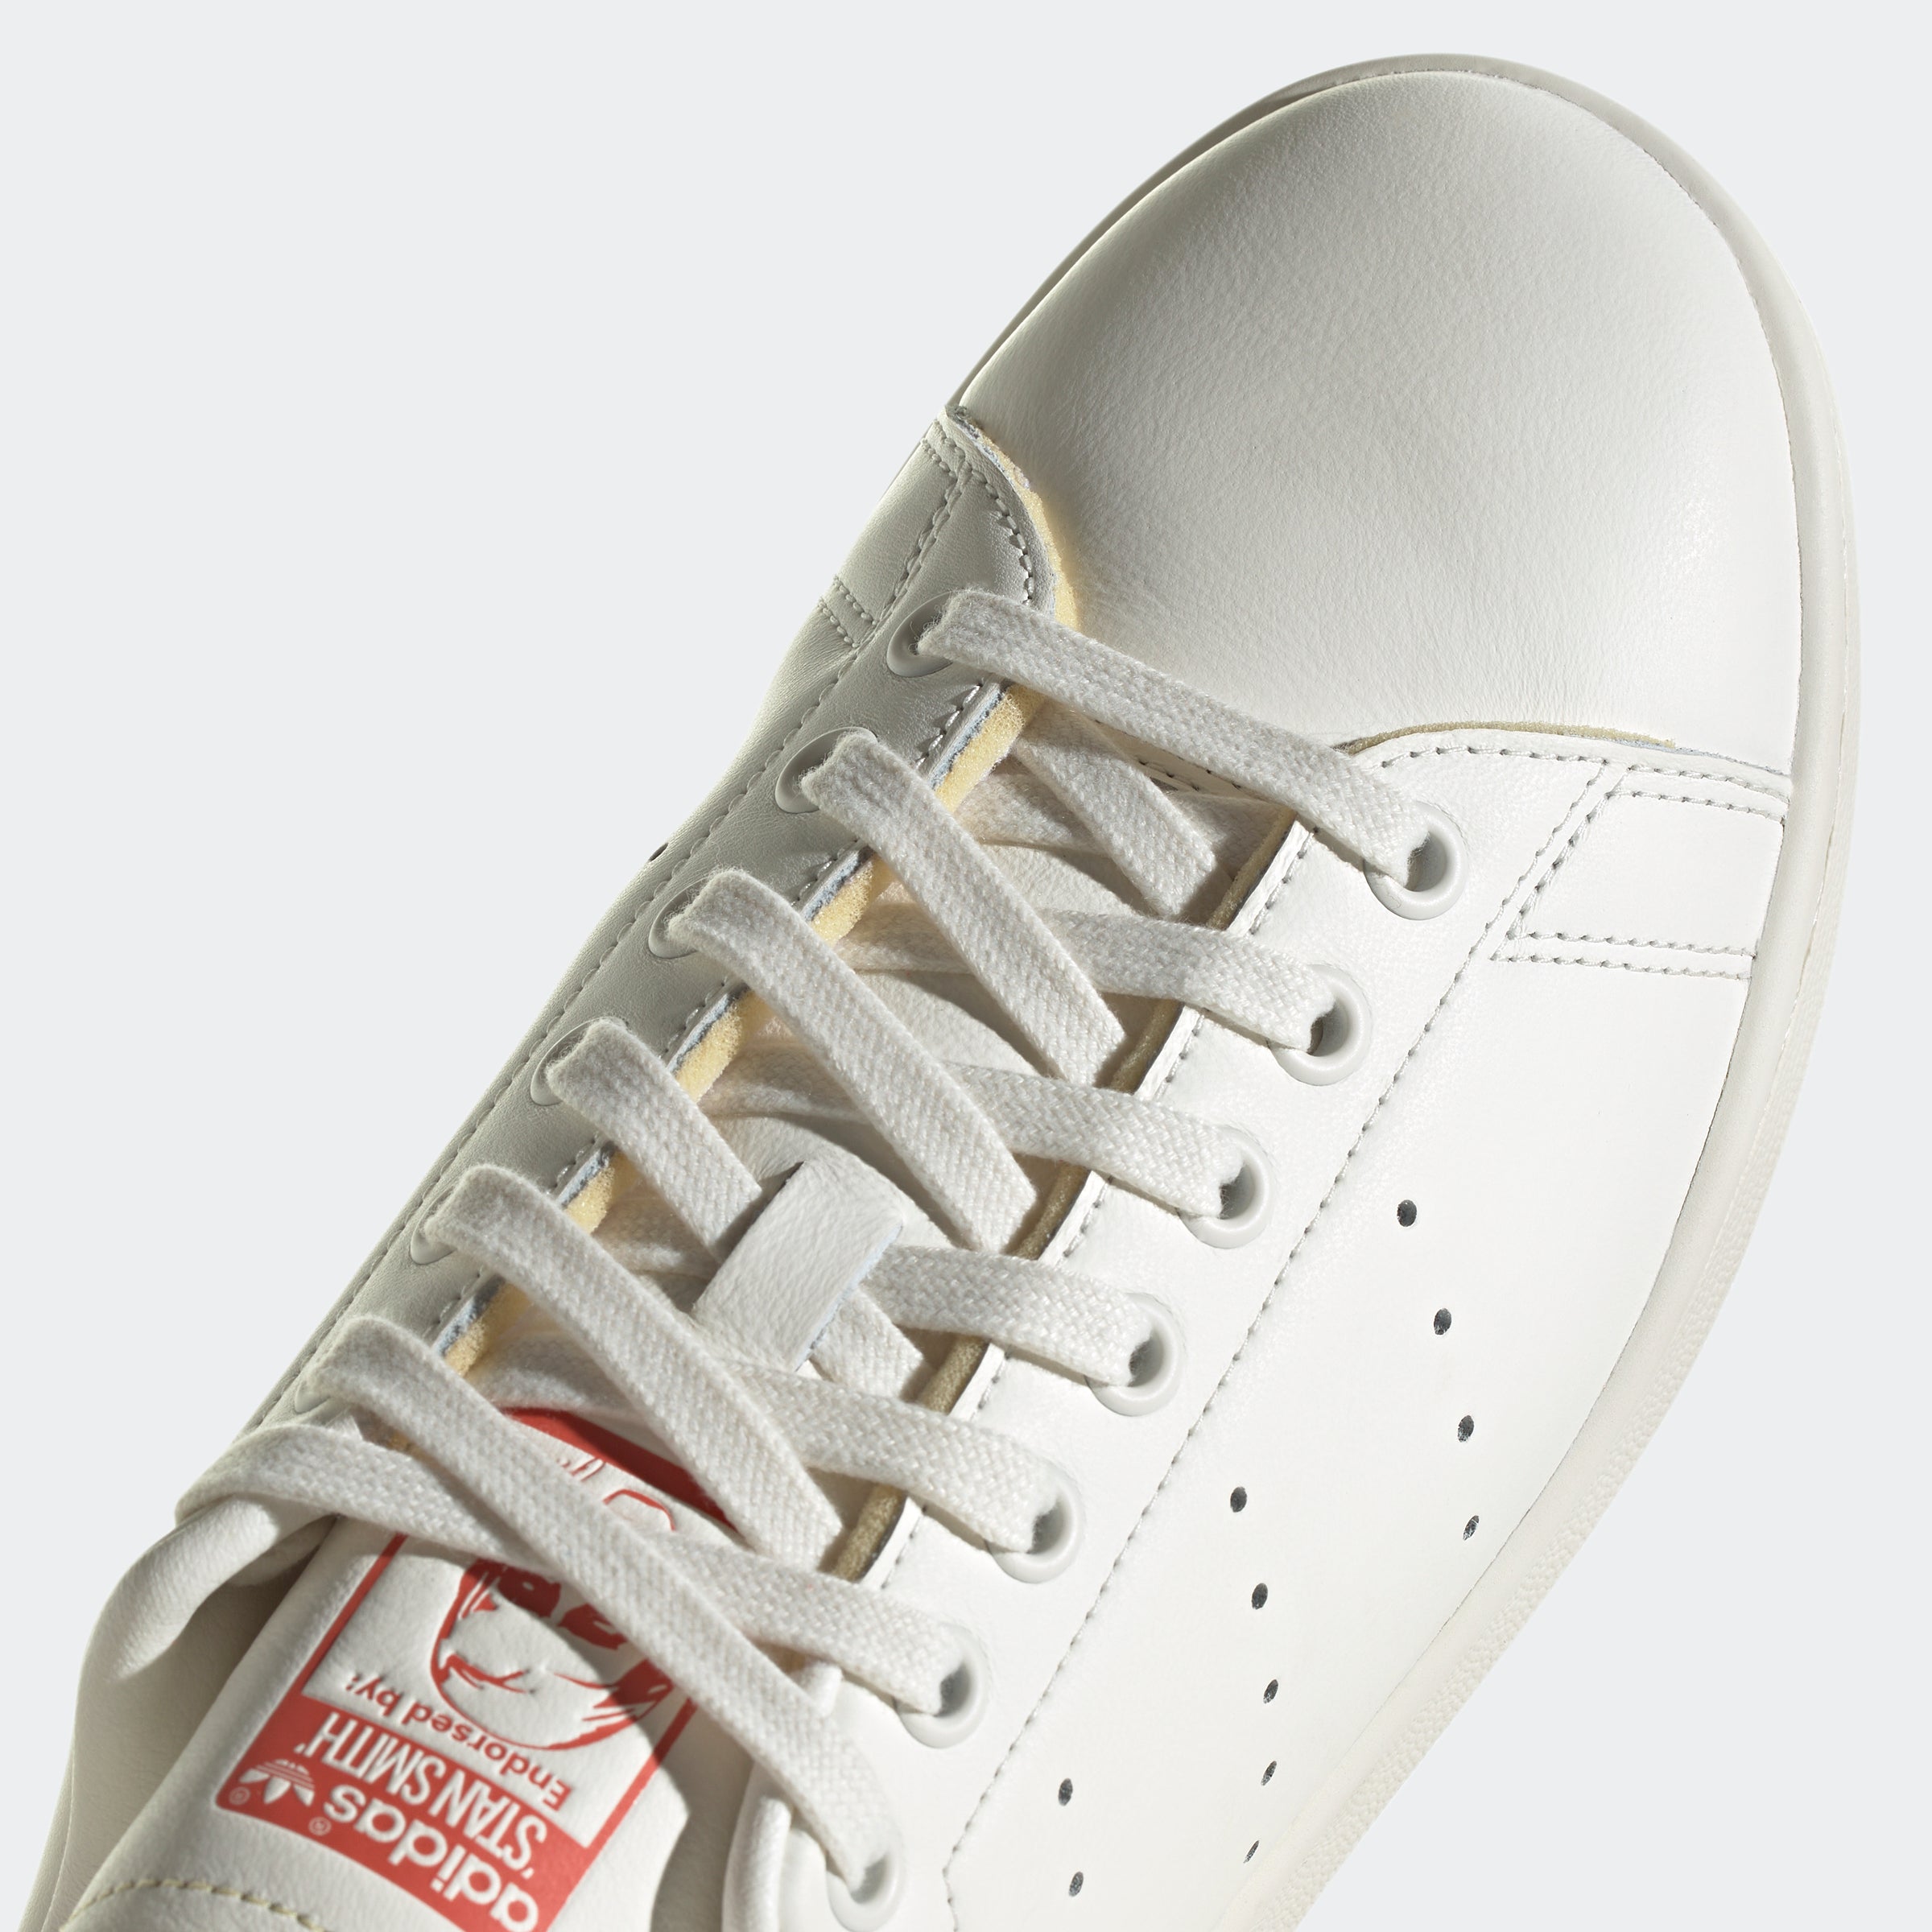 ADIDAS ORIGINALS STAN SMITH LUX SHOES, White Men's Sneakers